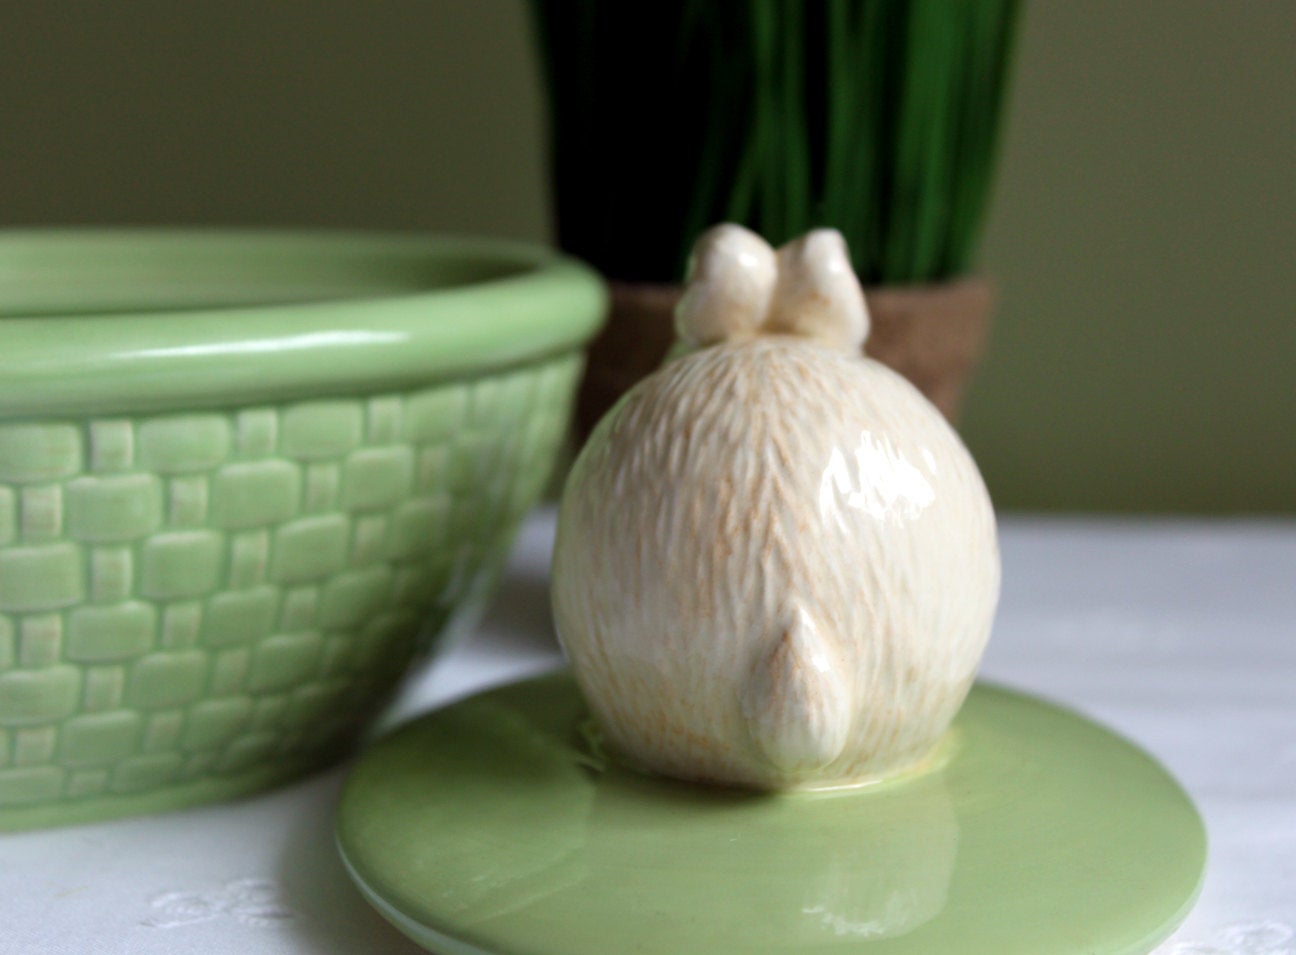 White Ceramic Bunny with Green Bow. Pink-Nosed, Blue-Eyed Rabbit